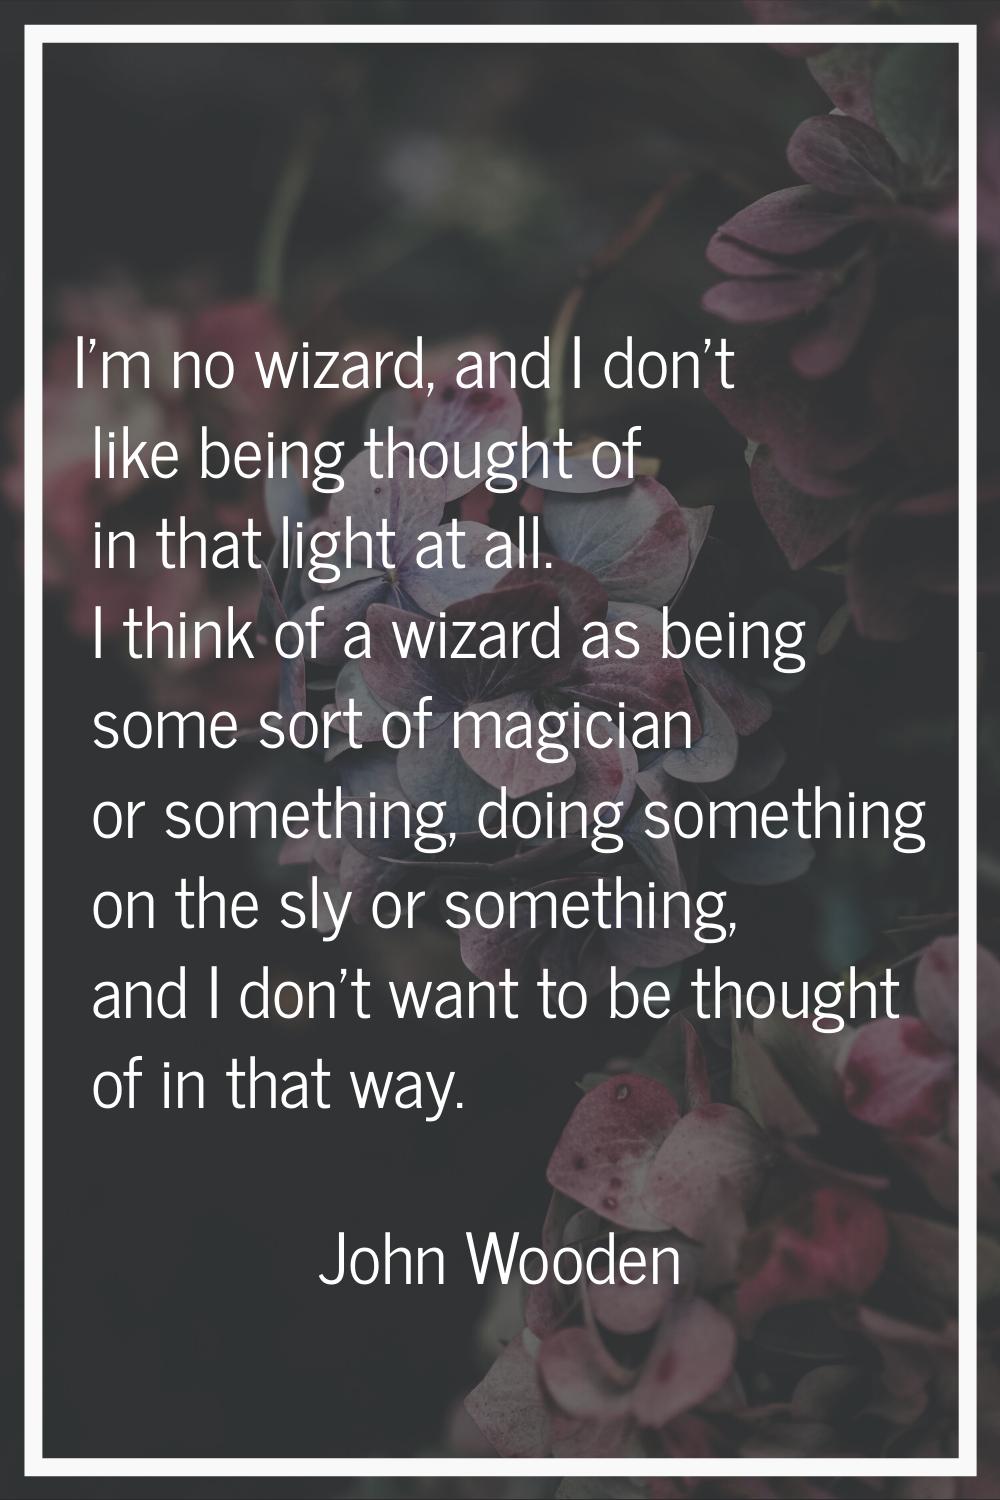 I'm no wizard, and I don't like being thought of in that light at all. I think of a wizard as being